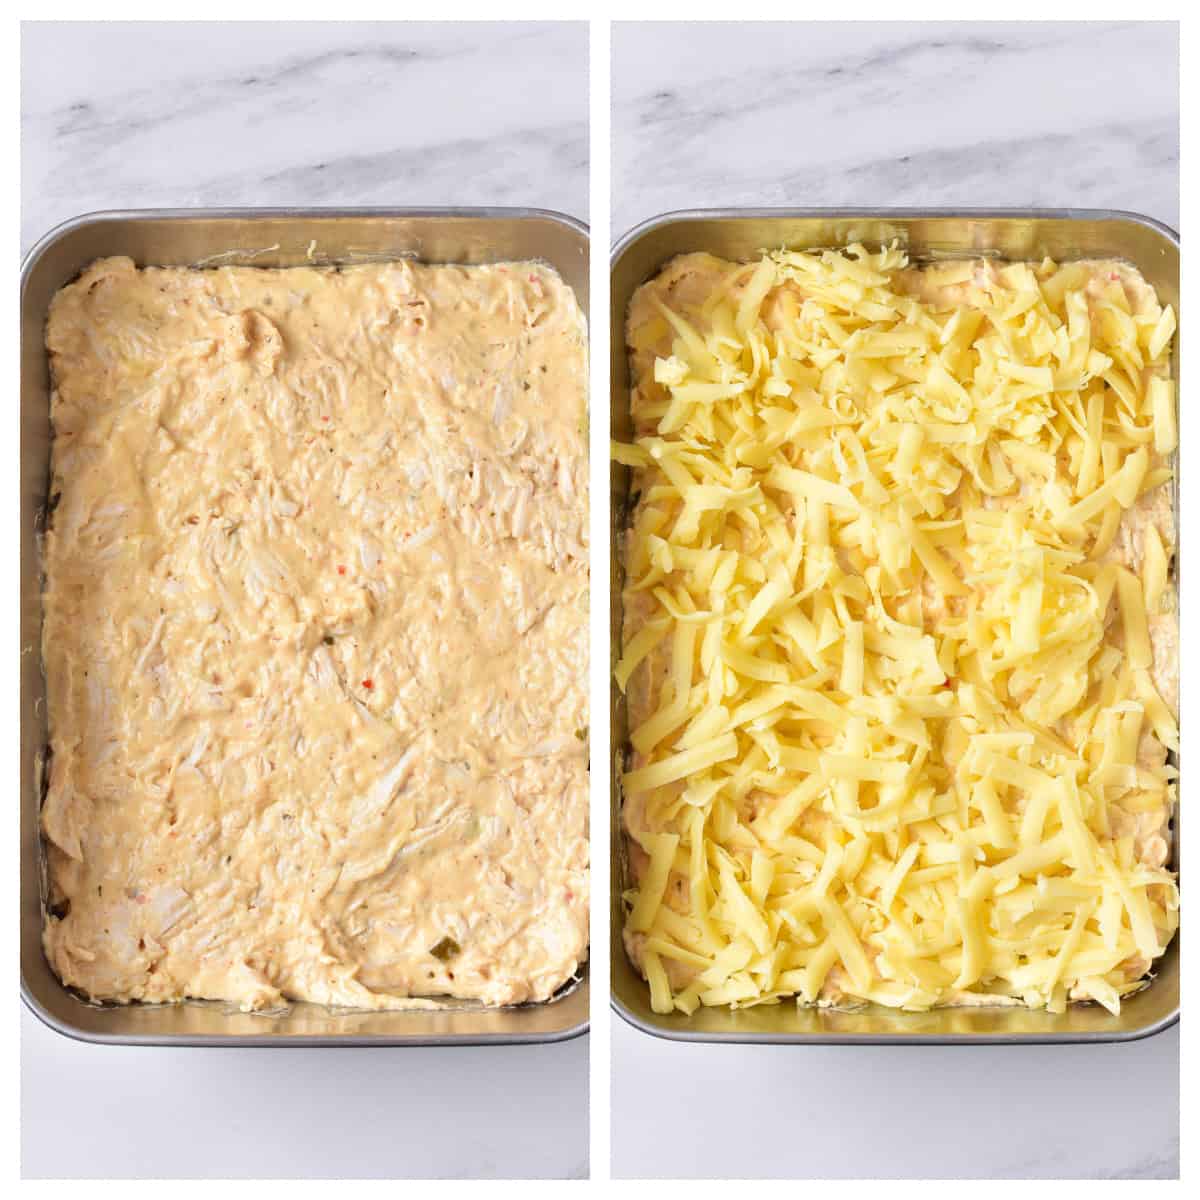 Dip spread into baking dish, and topped with cheese.